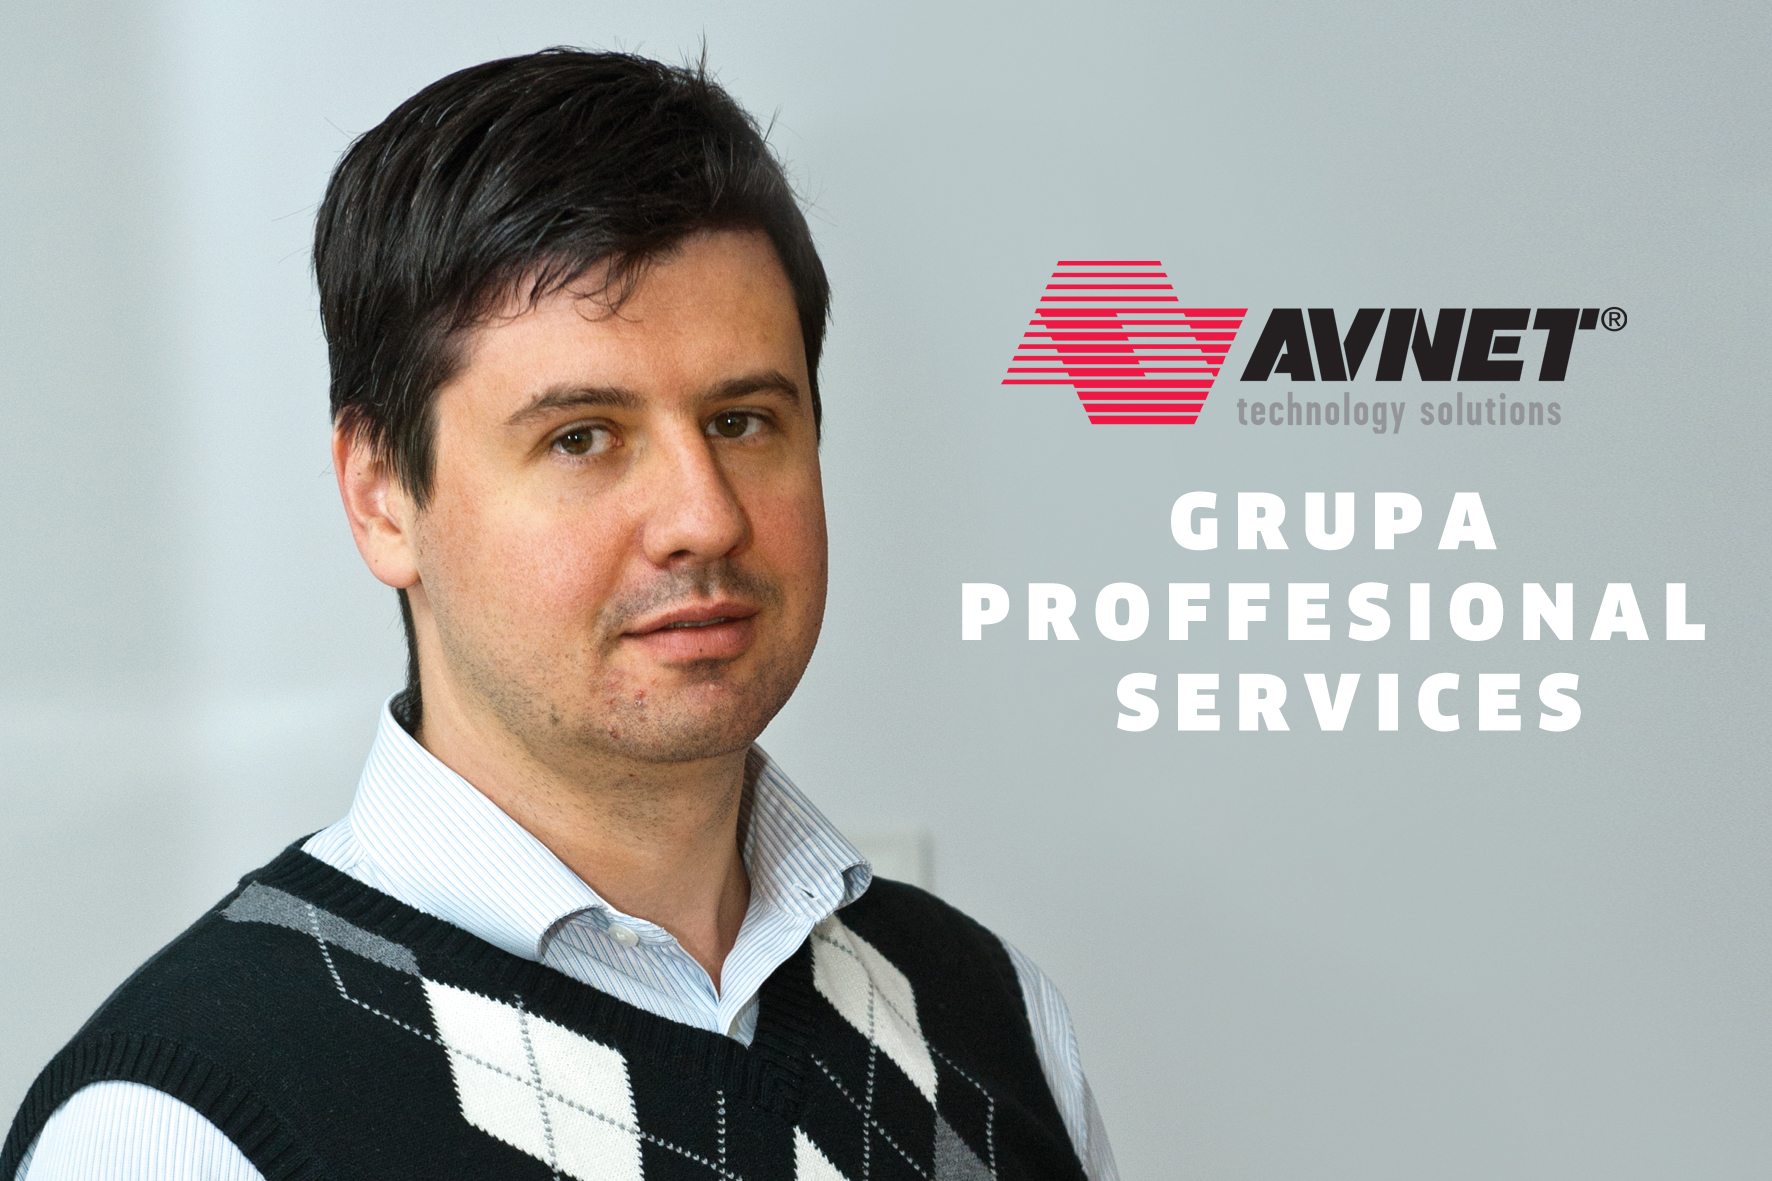 GRUPA Professional Services